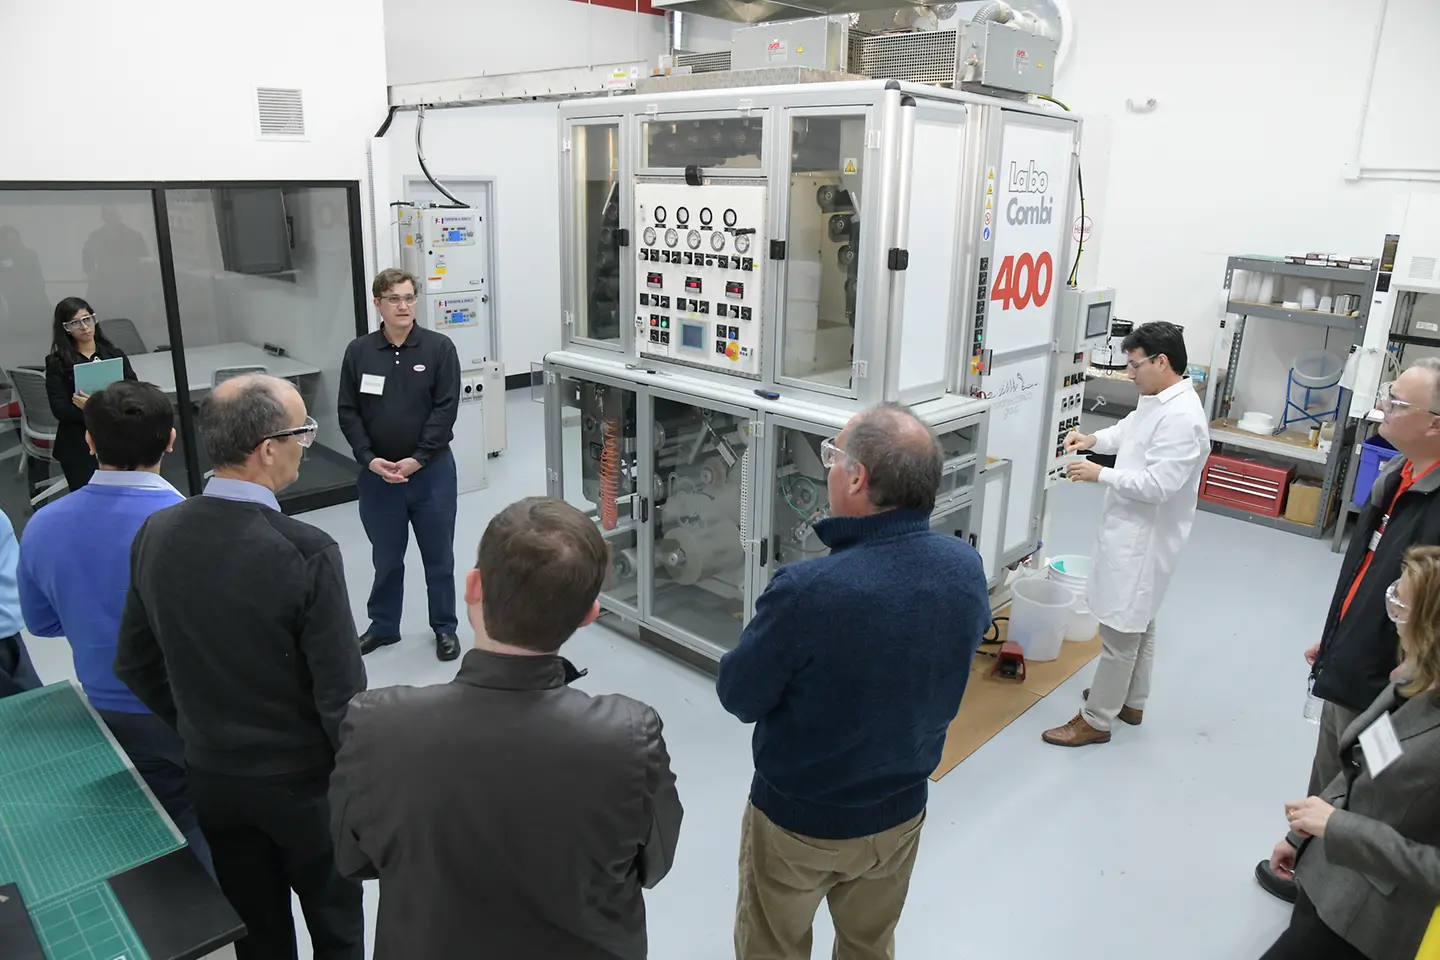 Henkel staff provided tours of the new Technical Center of Excellence focused on our flexible packaging applications. This investment included a laminator and retort chamber for flexible packaging development.